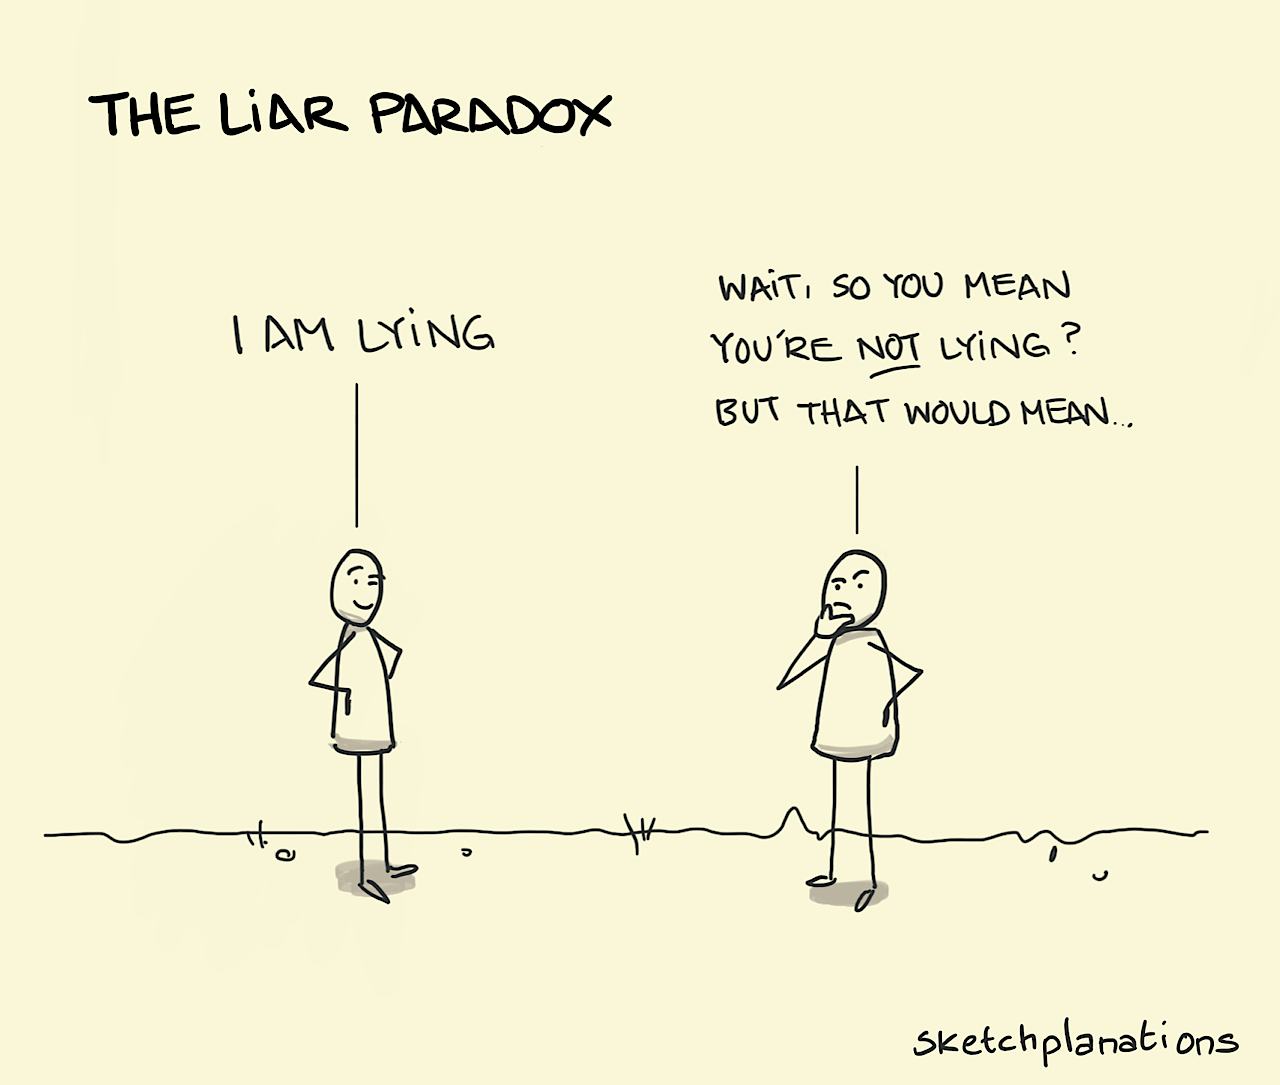 The liar paradox: one soul gets in a muddle trying to interpret when another says simple "I am lying"